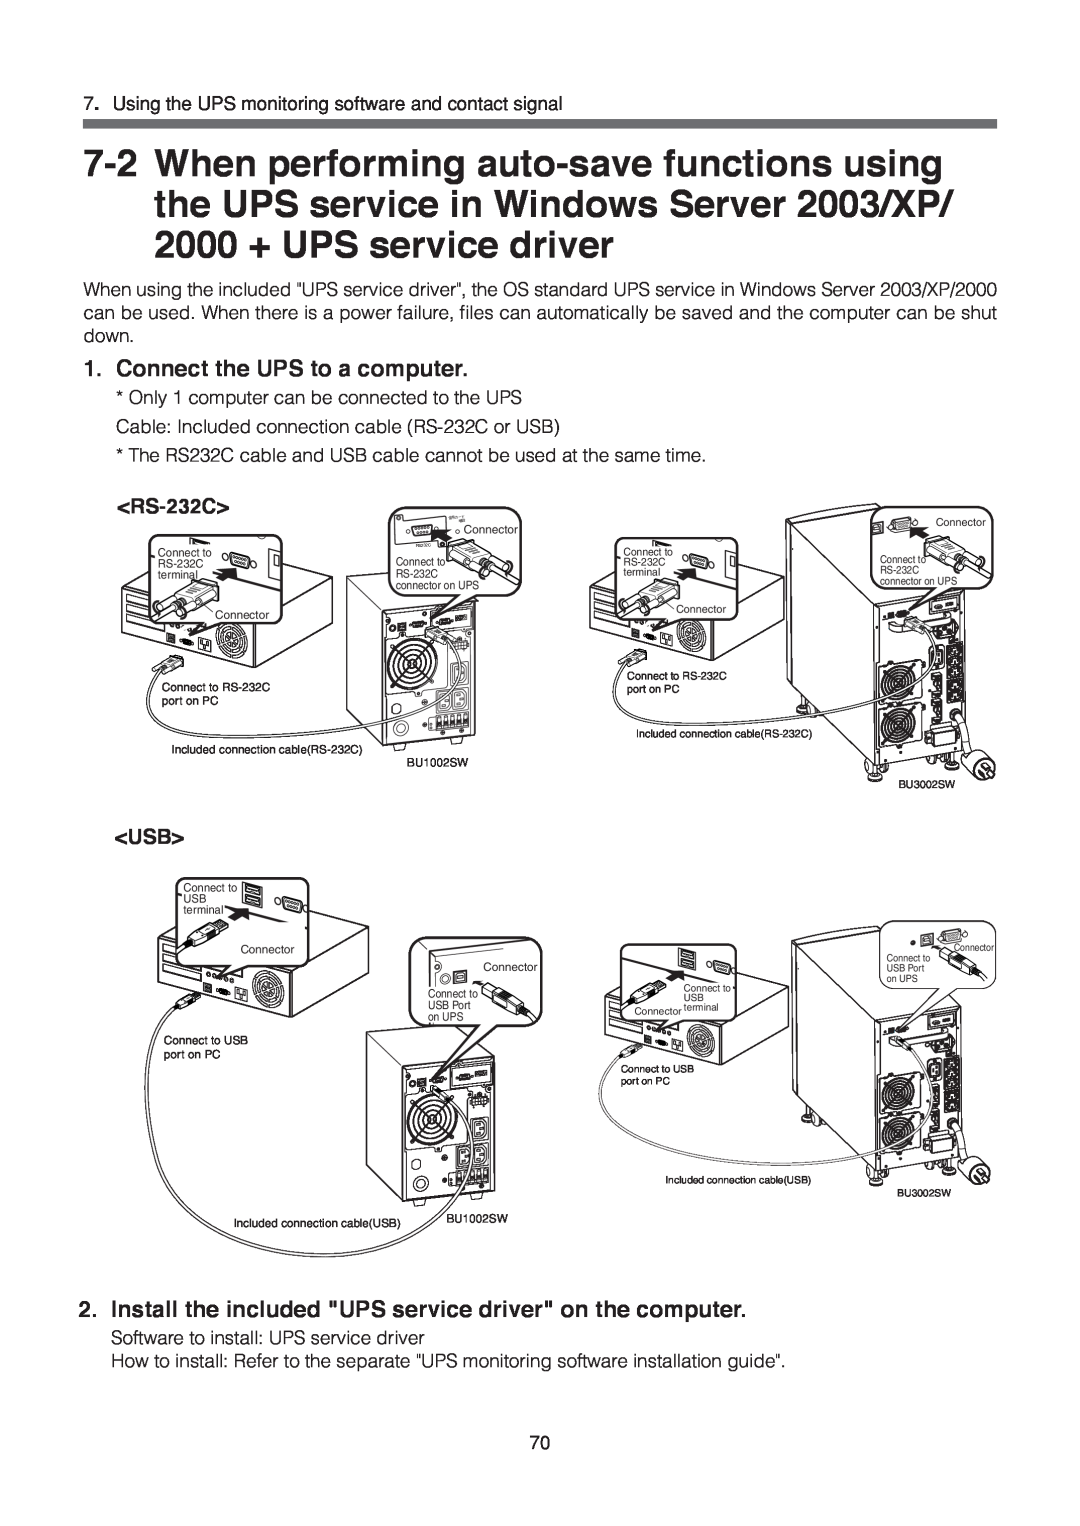 Omron BU3002SW, BU1002SW Connect the UPS to a computer, Install the included UPS service driver on the computer, RS-232C 